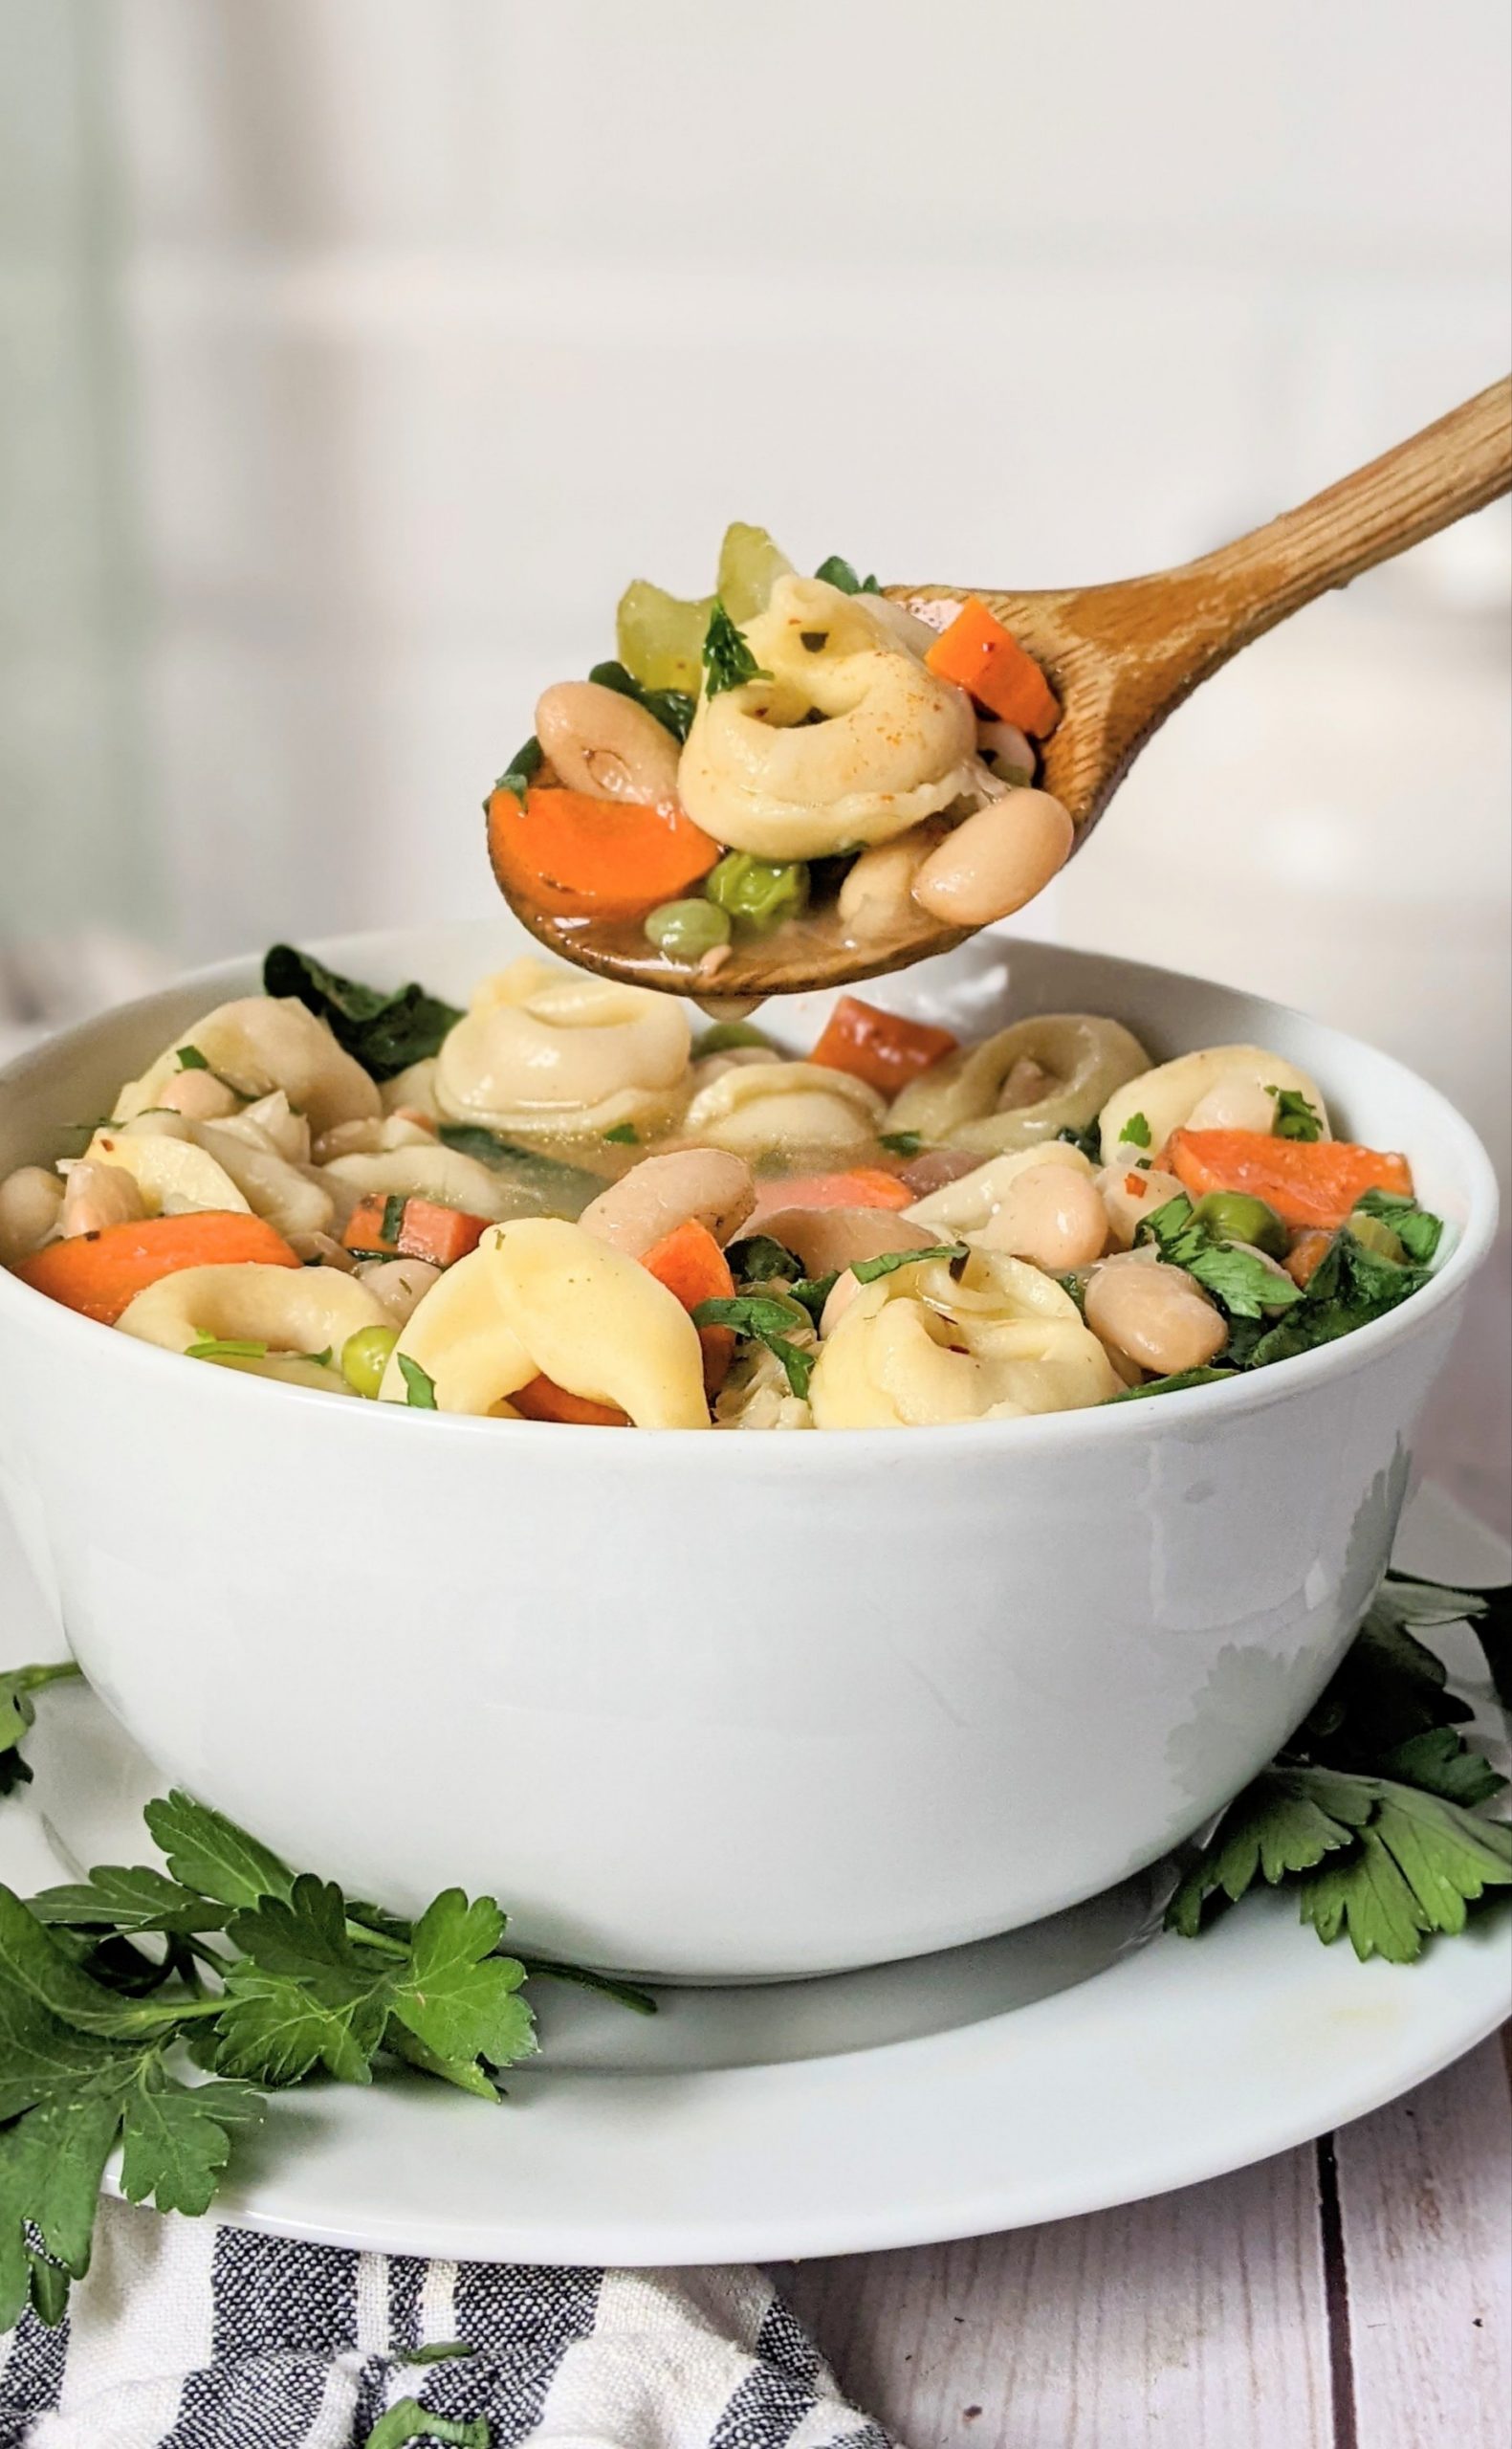 tortellini bean soup recipe with navy beans or cannellini bean soup with tortellini pasta cheese or pesto vegetarian meatless tortellini soup recipes without meat